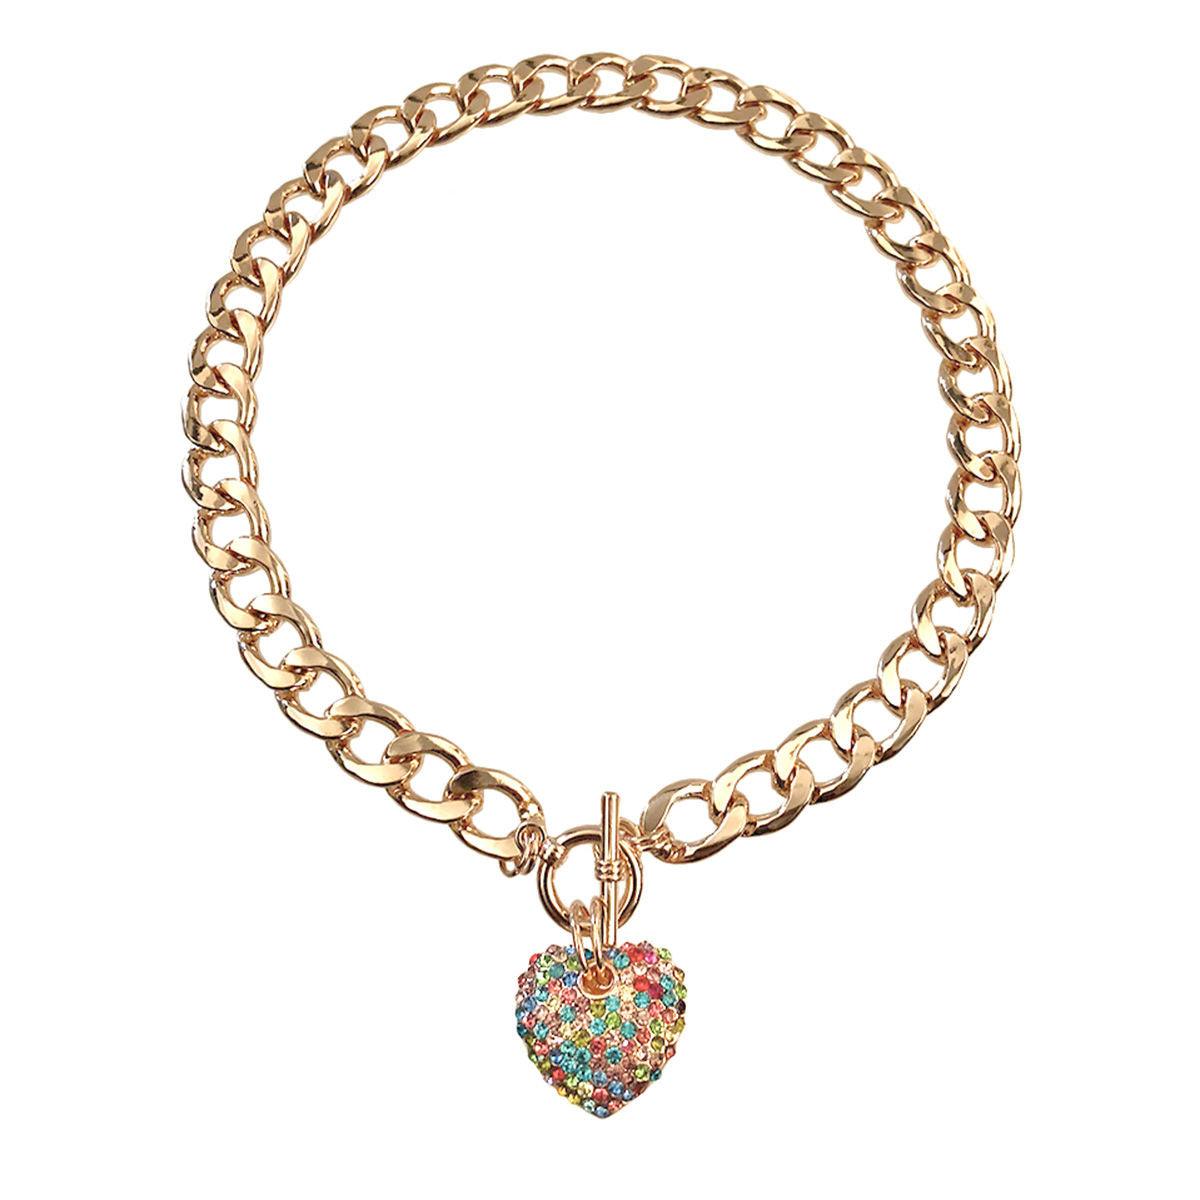 Yellow Gold Plated Link Chain Necklace Multicolor Heart Charm